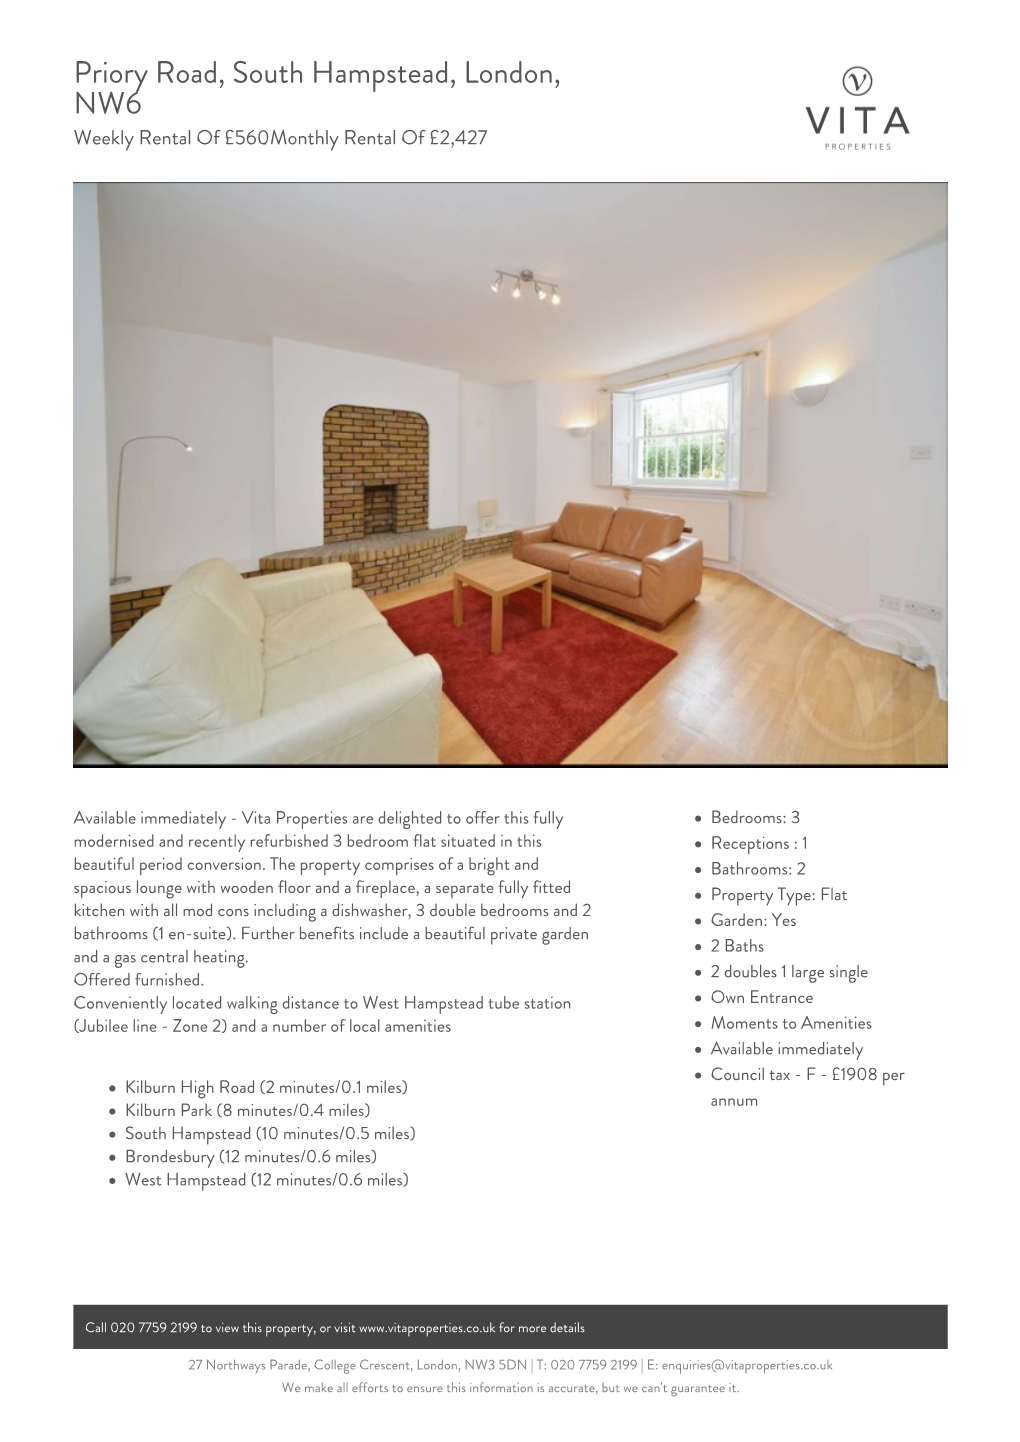 Priory Road, South Hampstead, London, NW6 Weekly Rental of £560Monthly Rental of £2,427